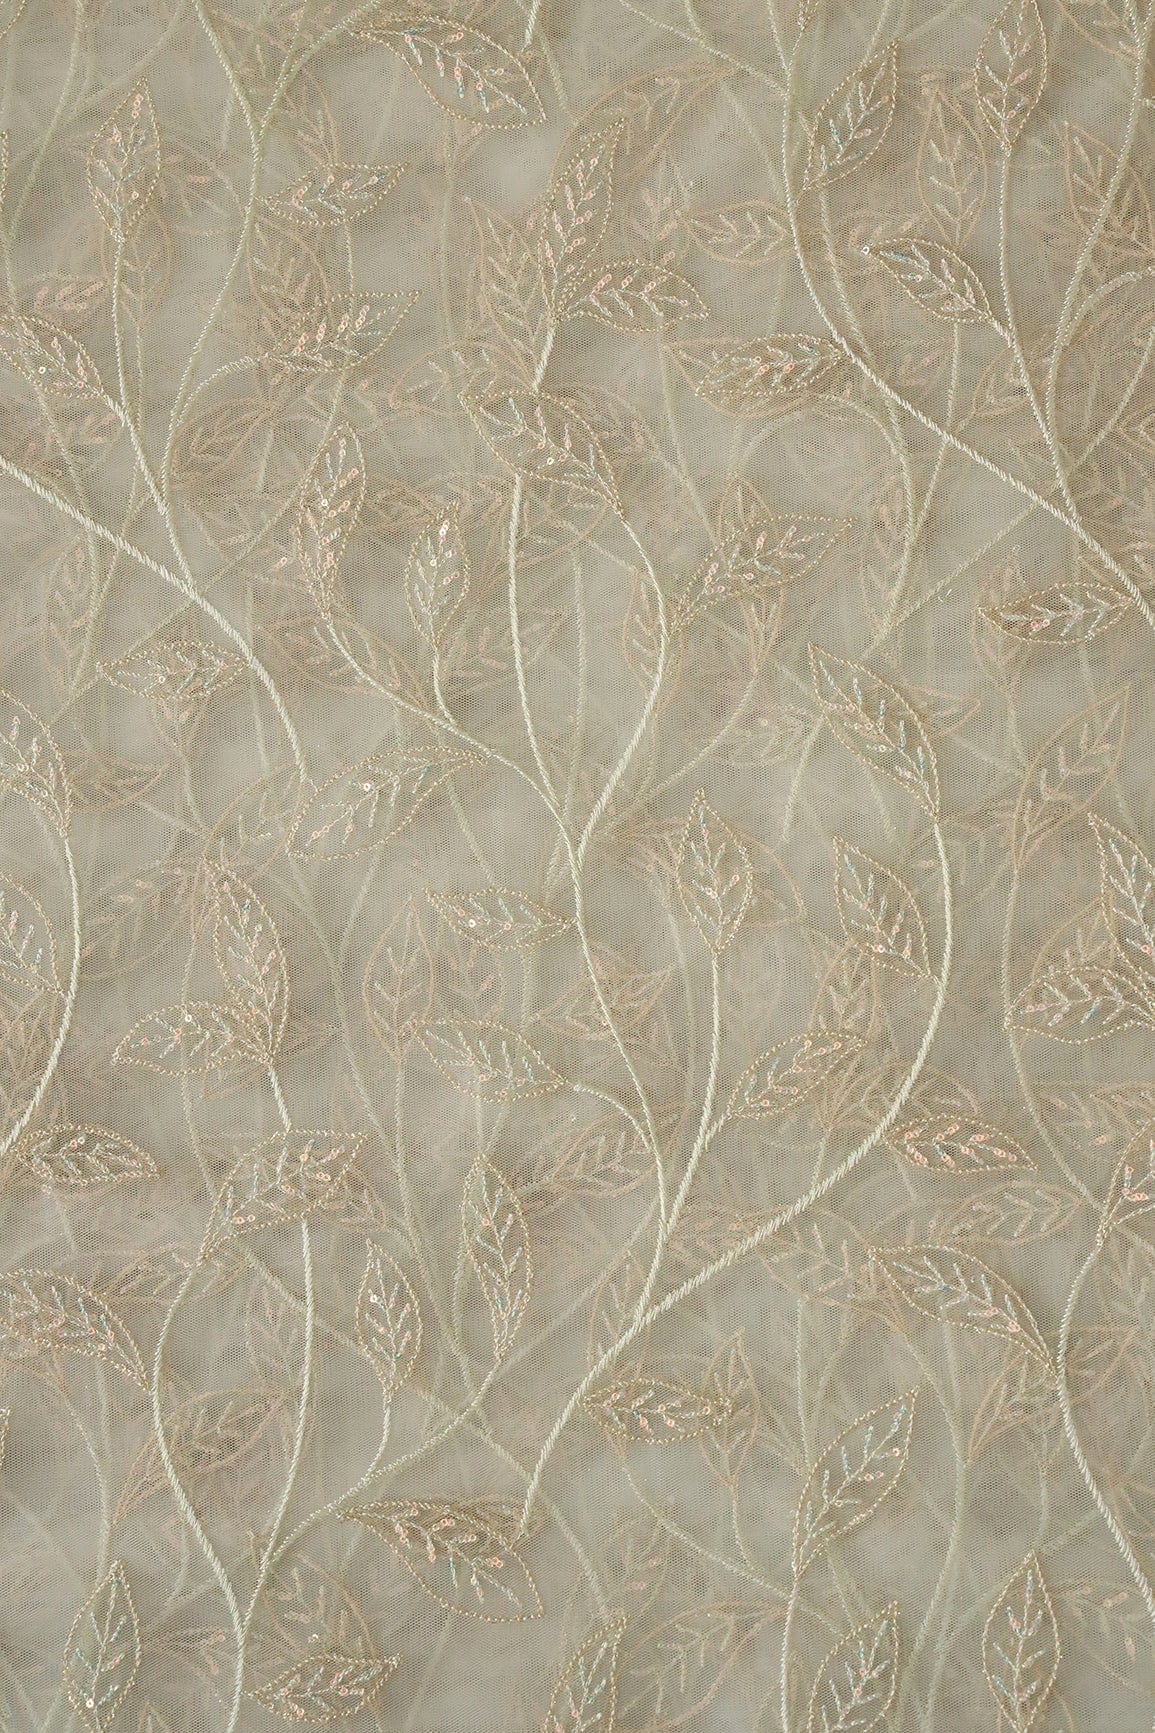 doeraa Embroidery Fabrics Olive Thread With Sequins Beautiful Leafy Embroidery On Olive Soft Net Fabric